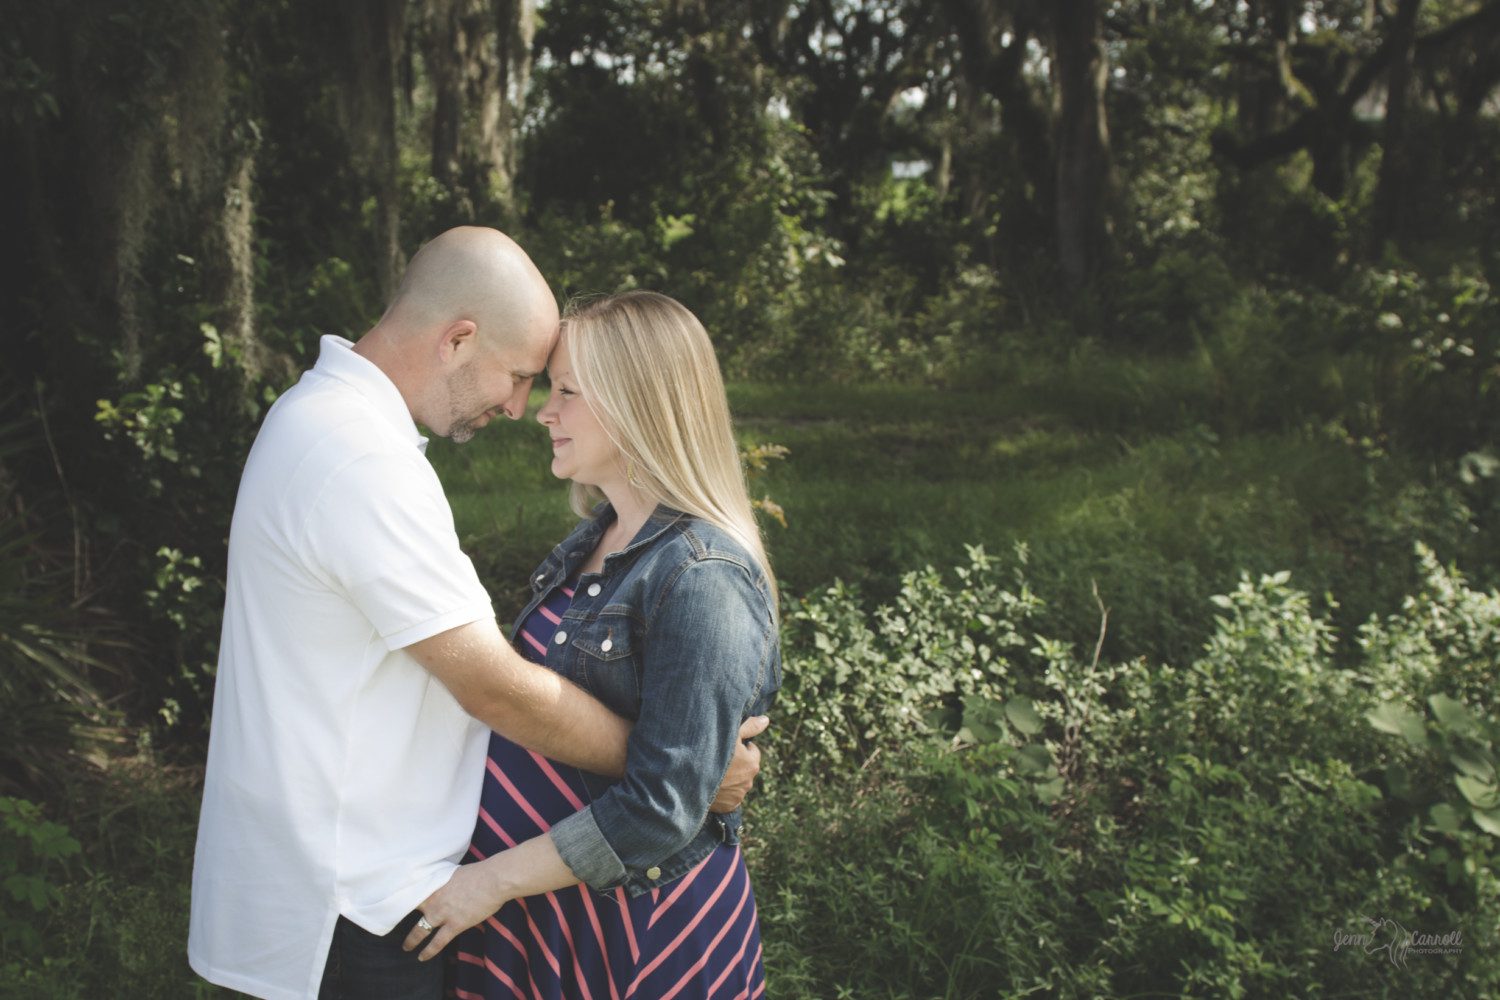 Jenn Carroll Photography, Maternity, Family, Family photographer, maternity session, baby bump, children, family of five, mommy-to-be, Tampa, Florida, Tampa photographer, Florida photographer